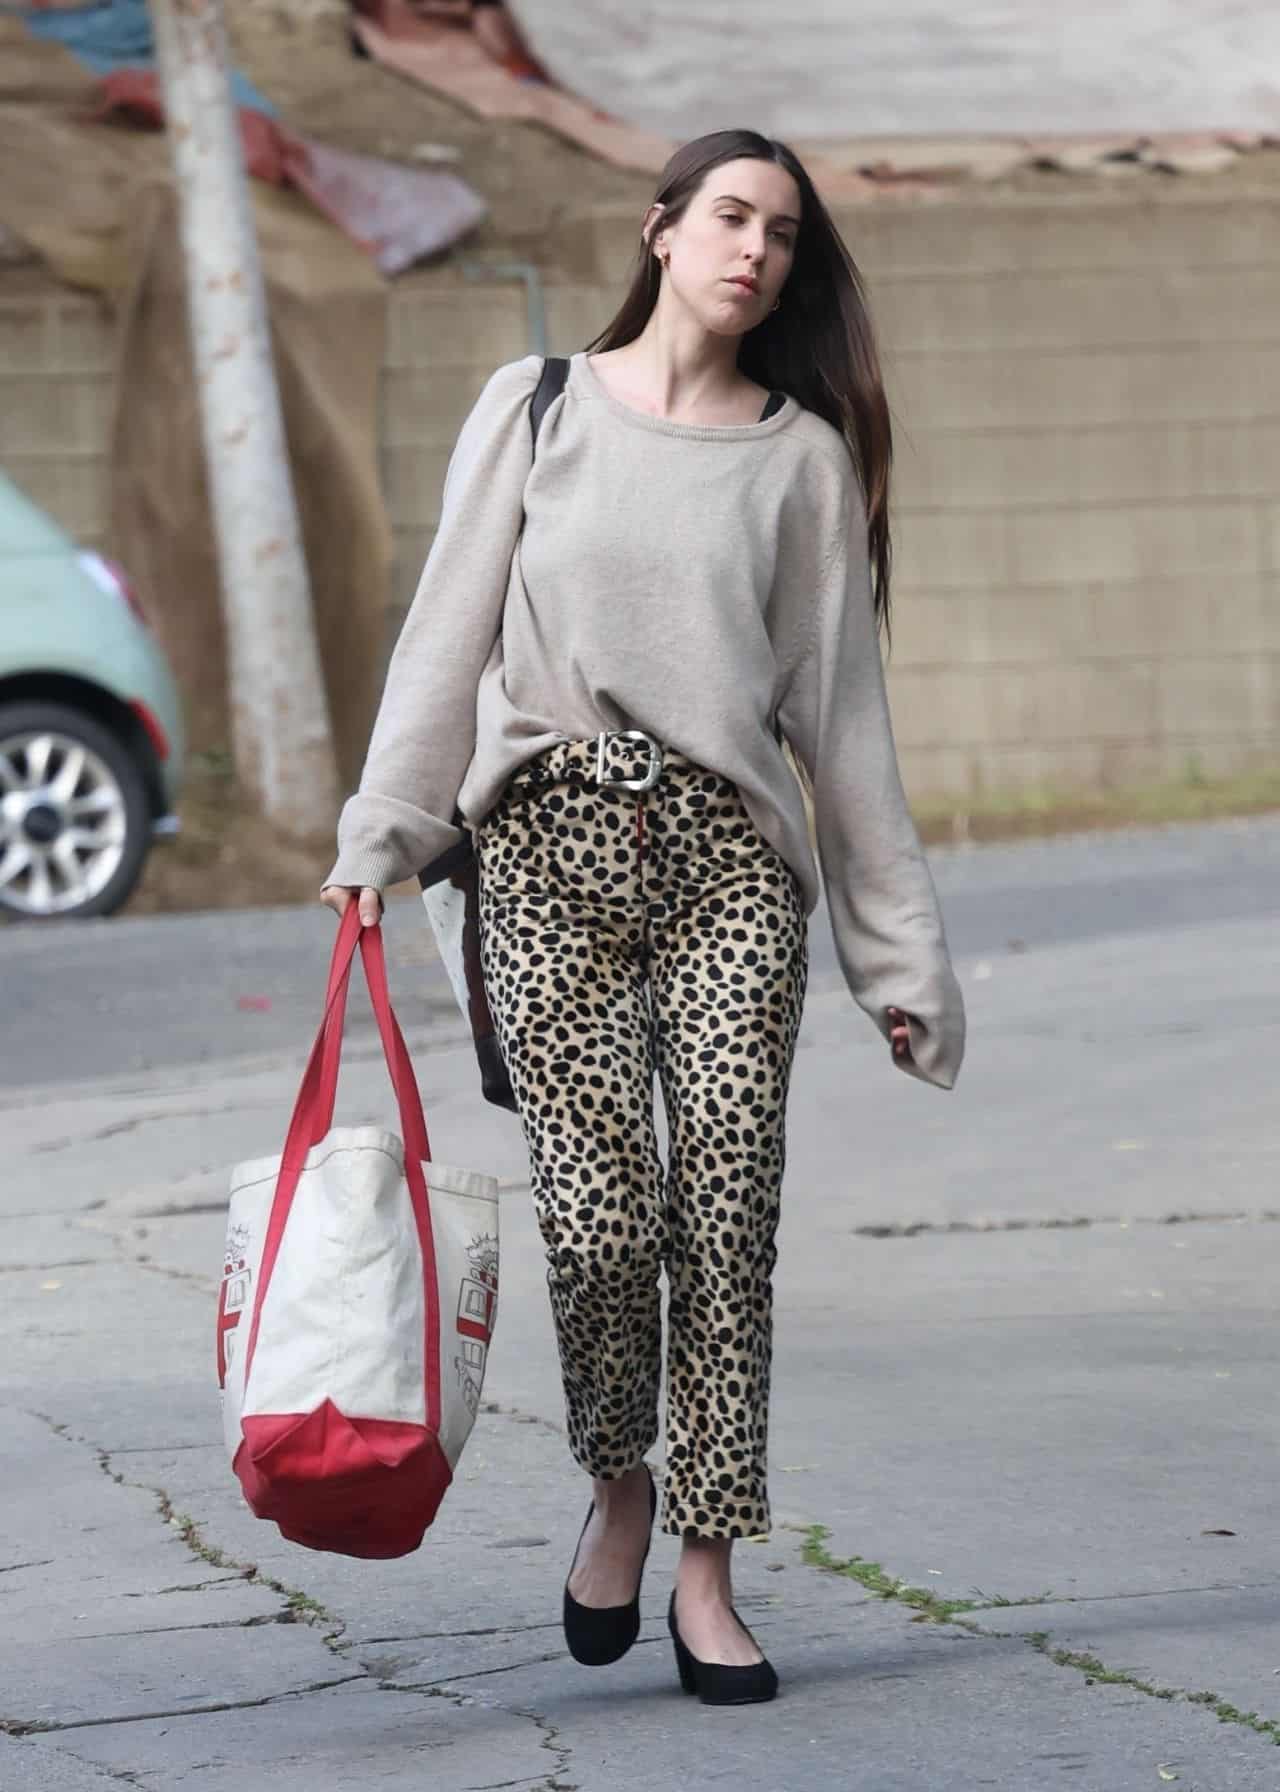 Scout Willis Looks Chic in a Cashmere Sweater and Leopard Print Pants in LA